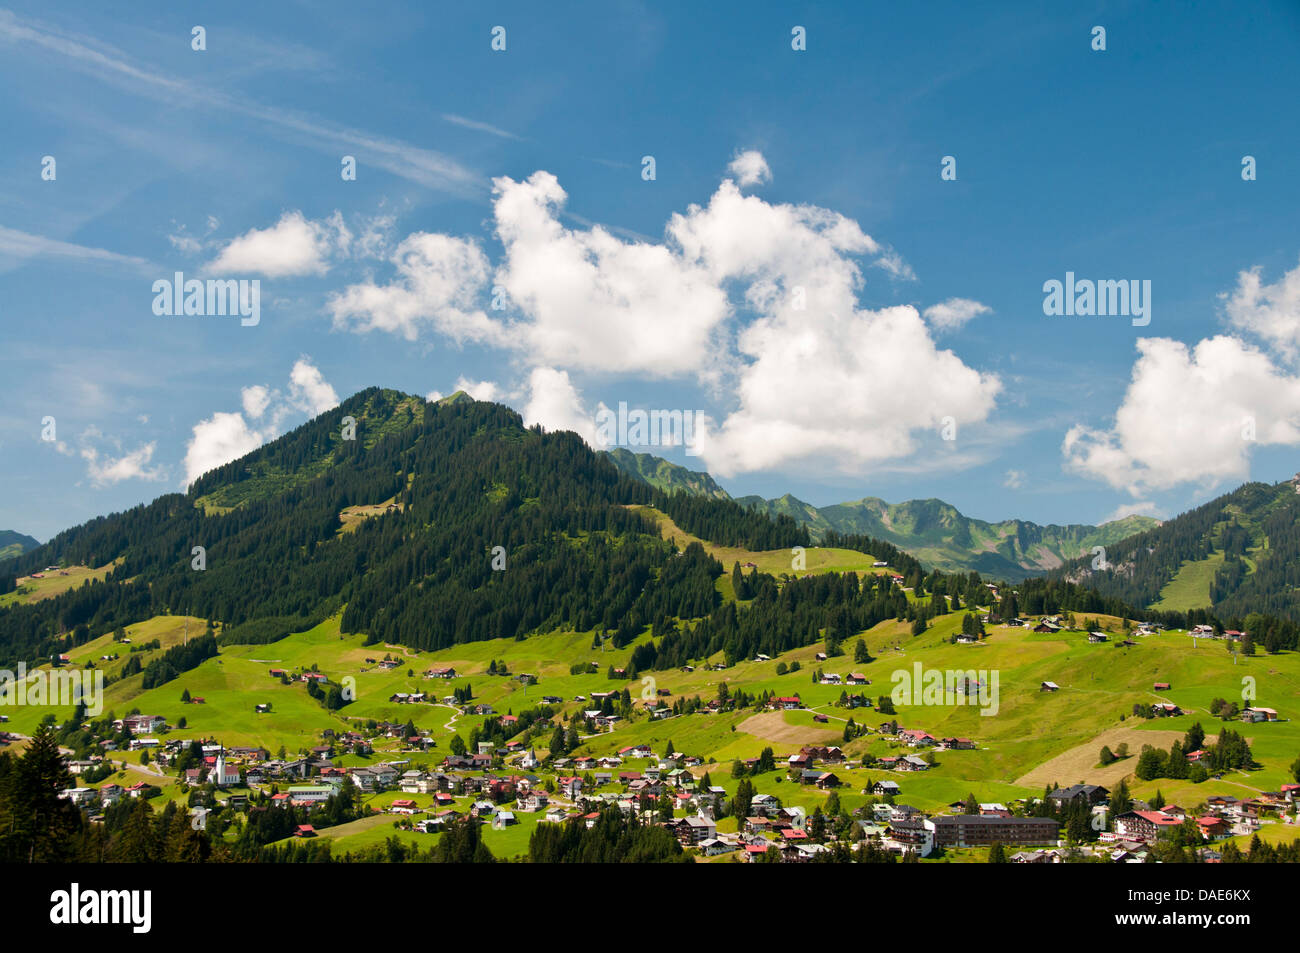 panoramic view over the mountain village in the Kleinwalsertal with the Heuberg (1795 m) in the background, Austria, Vorarlberg, Allgaeu, Hirschegg Stock Photo